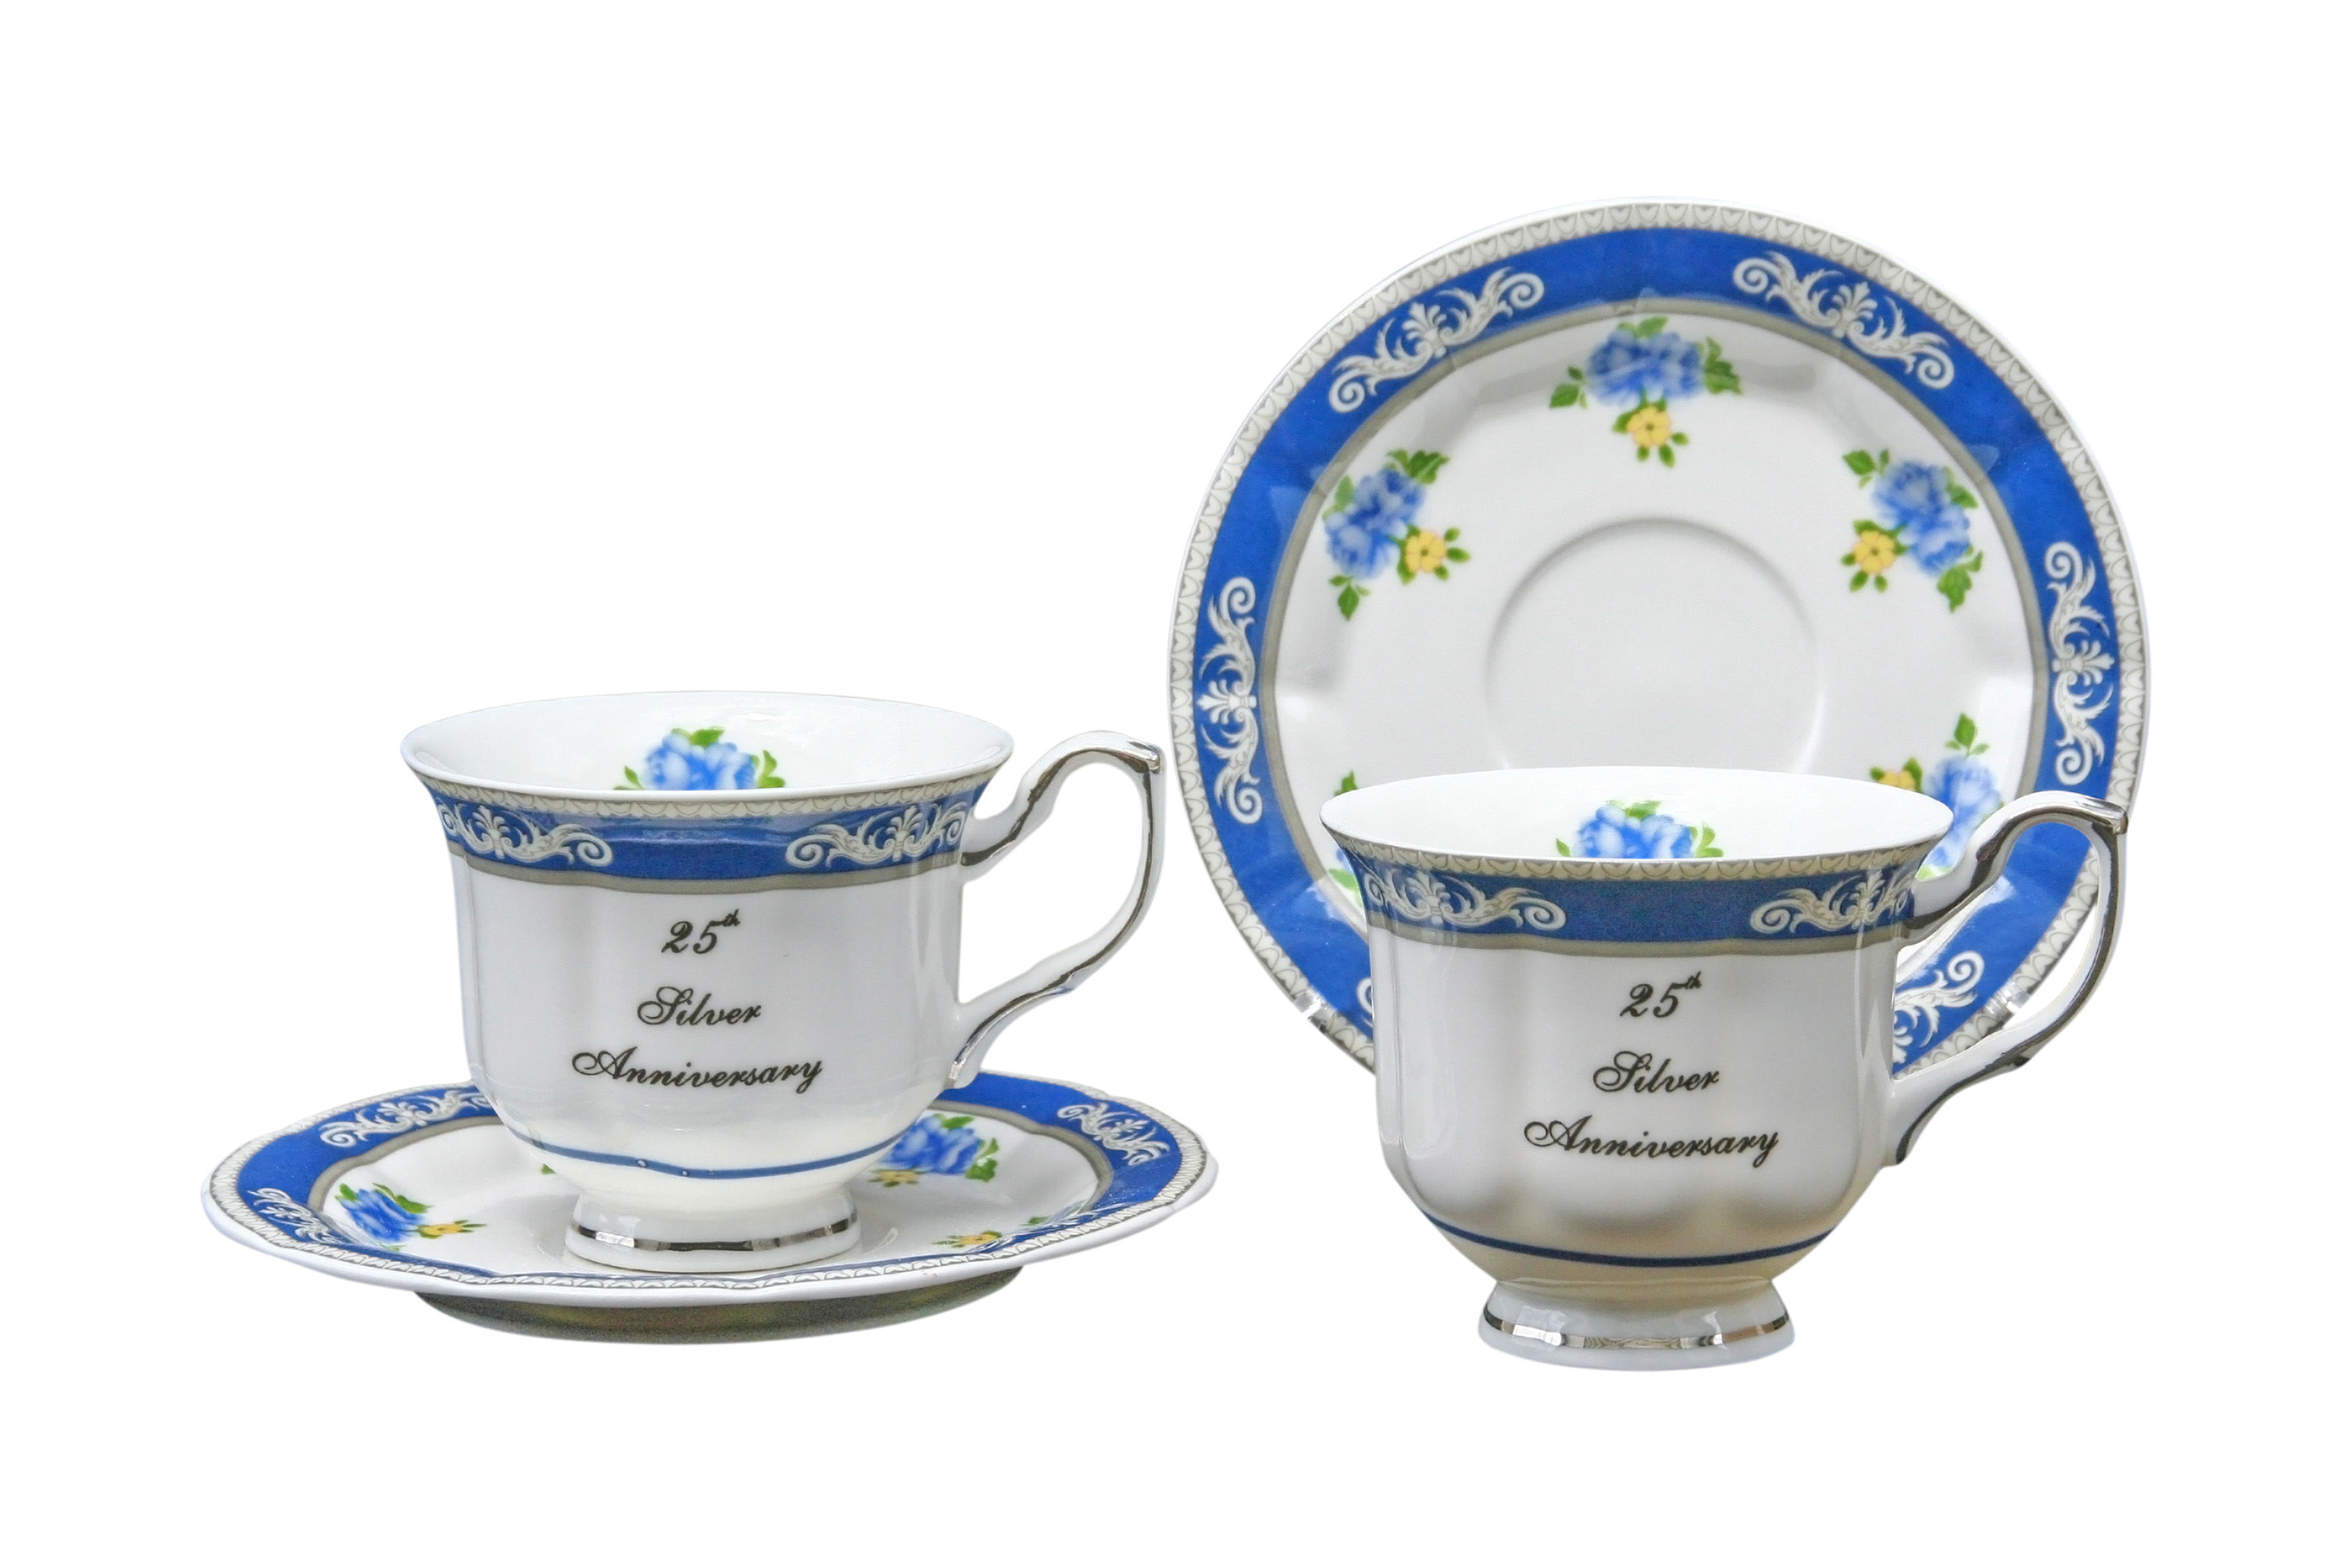 25th Anniversary 2cup and saucer set - Click Image to Close